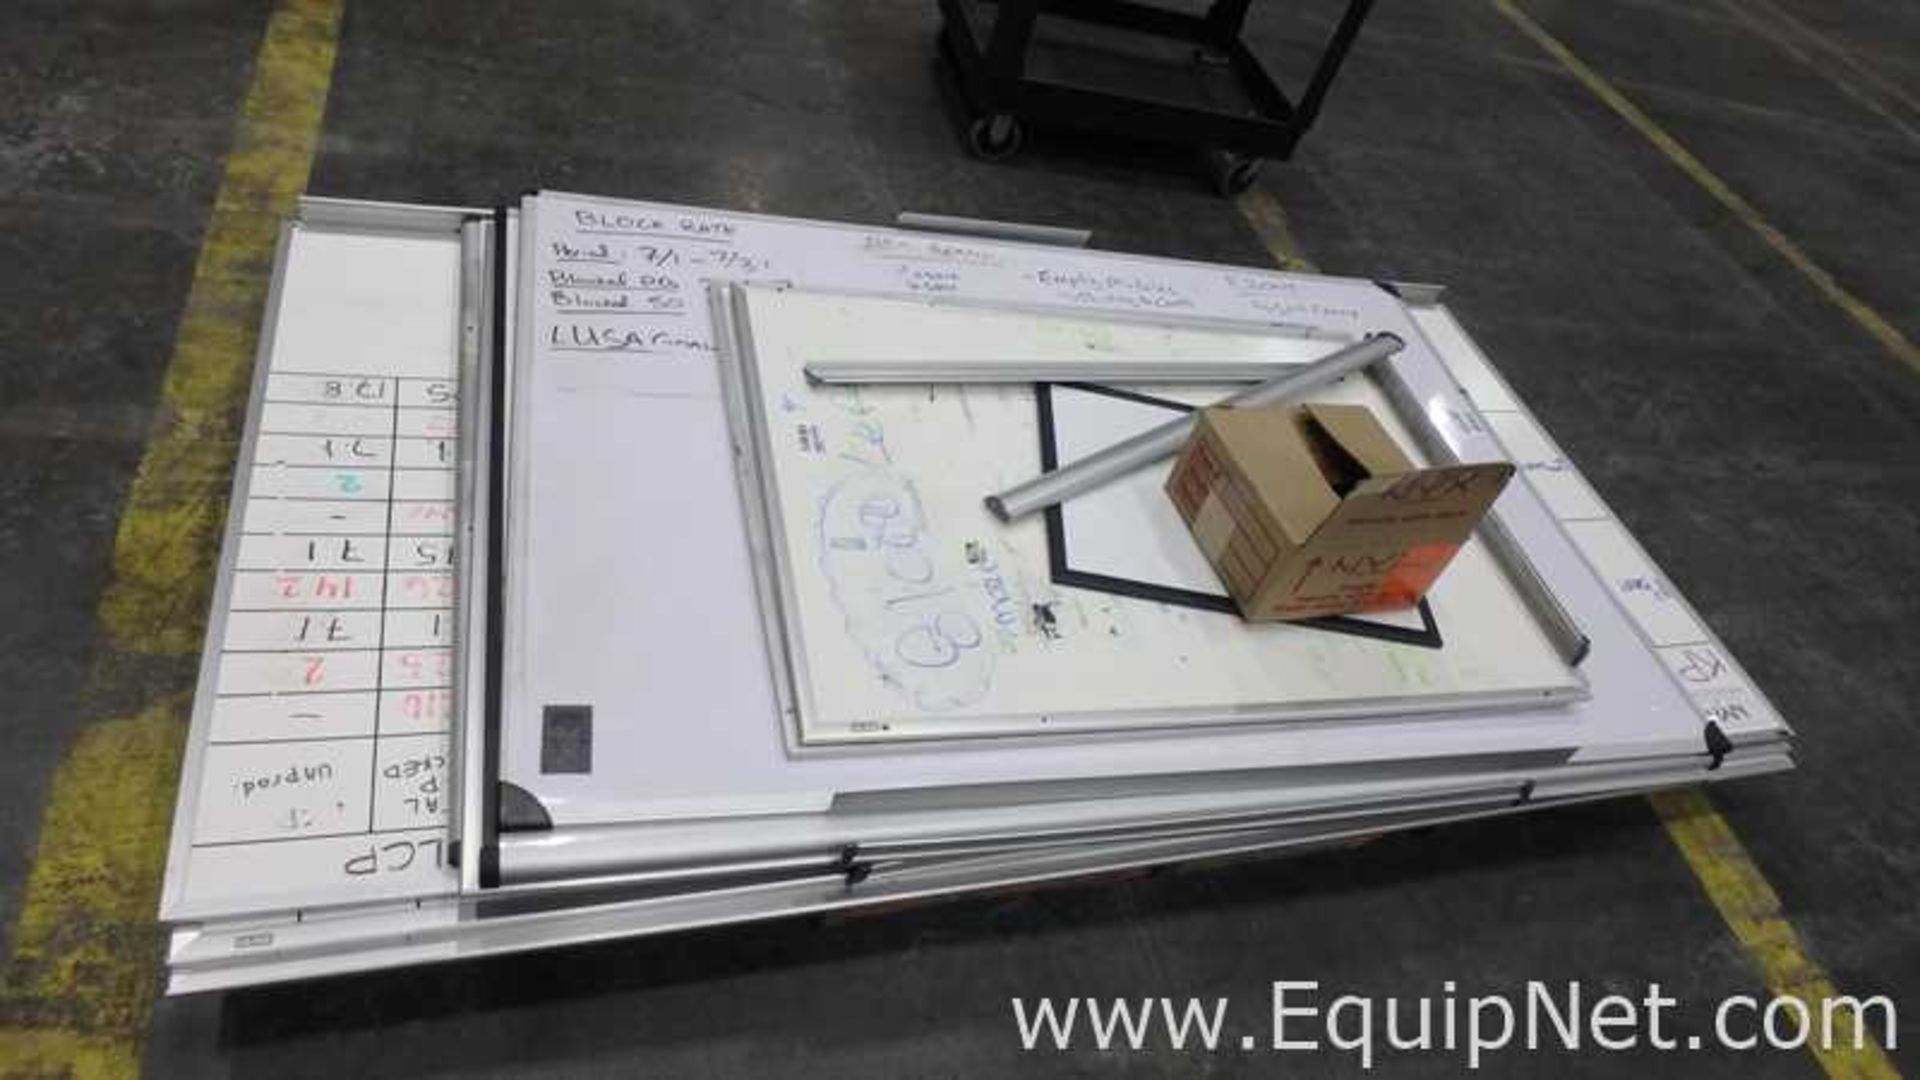 Lot of 1 Pallet of White Wall Boards Assorted Sizes - Image 3 of 3